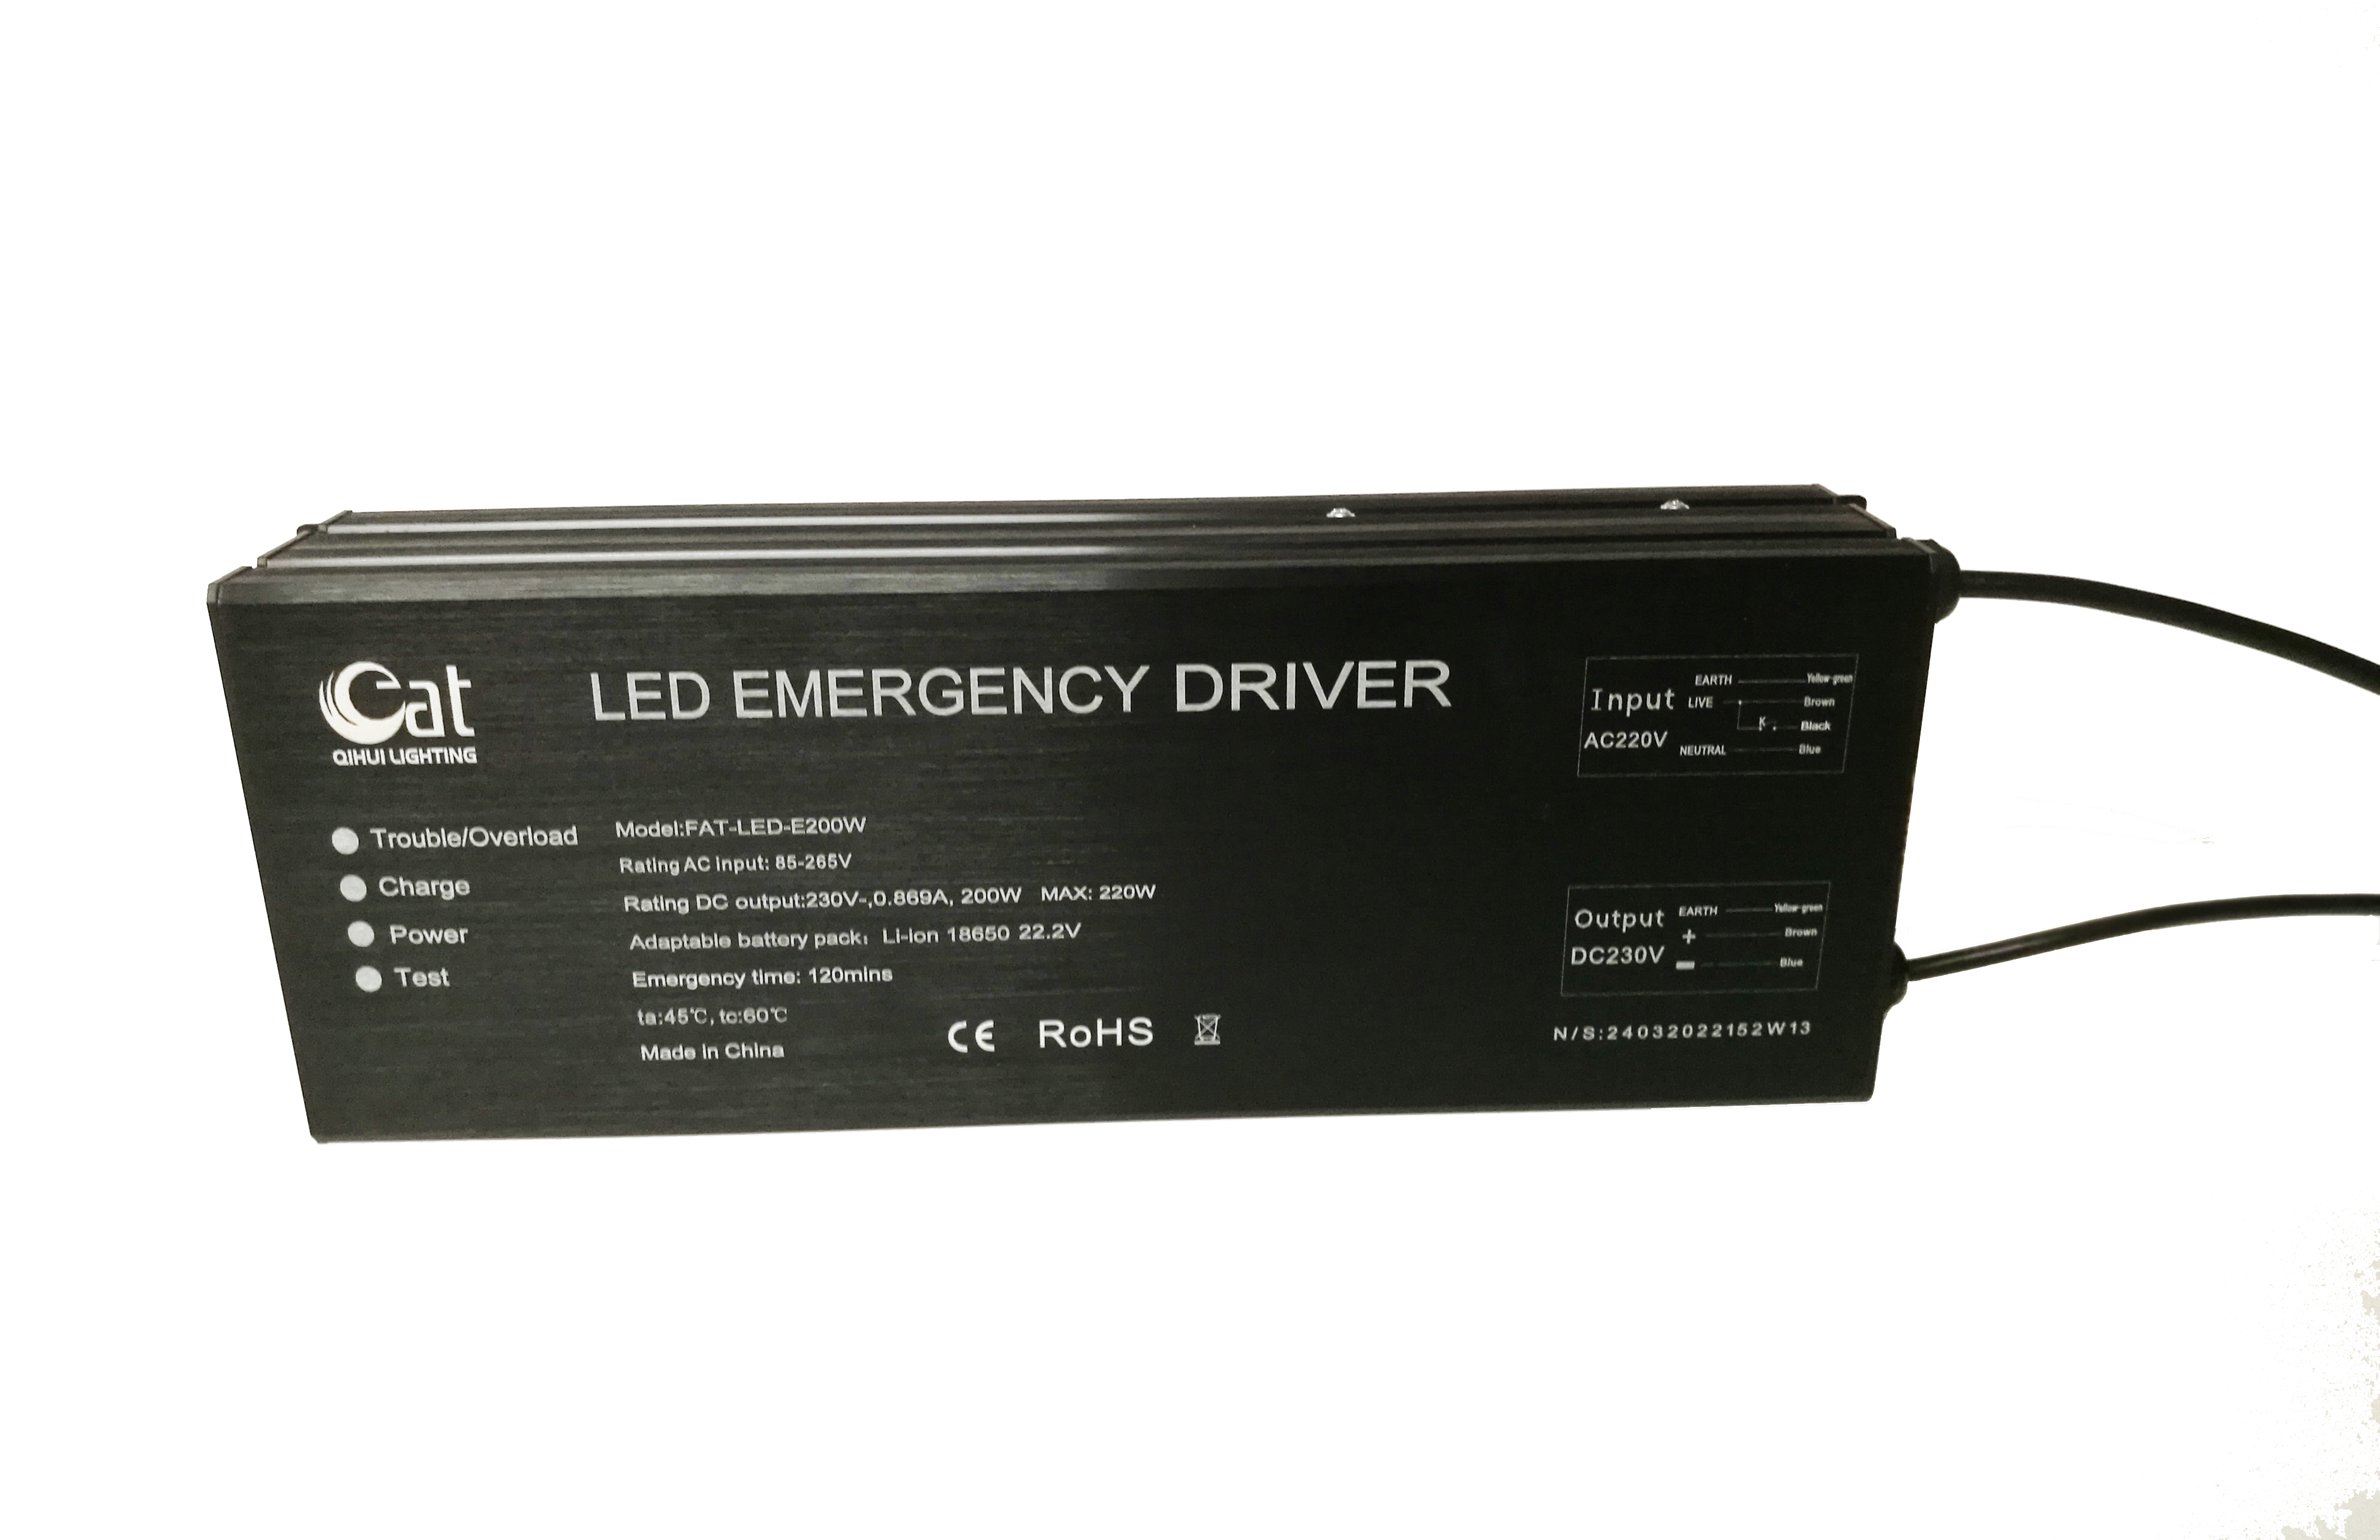 200W high power full output LED emergency driver